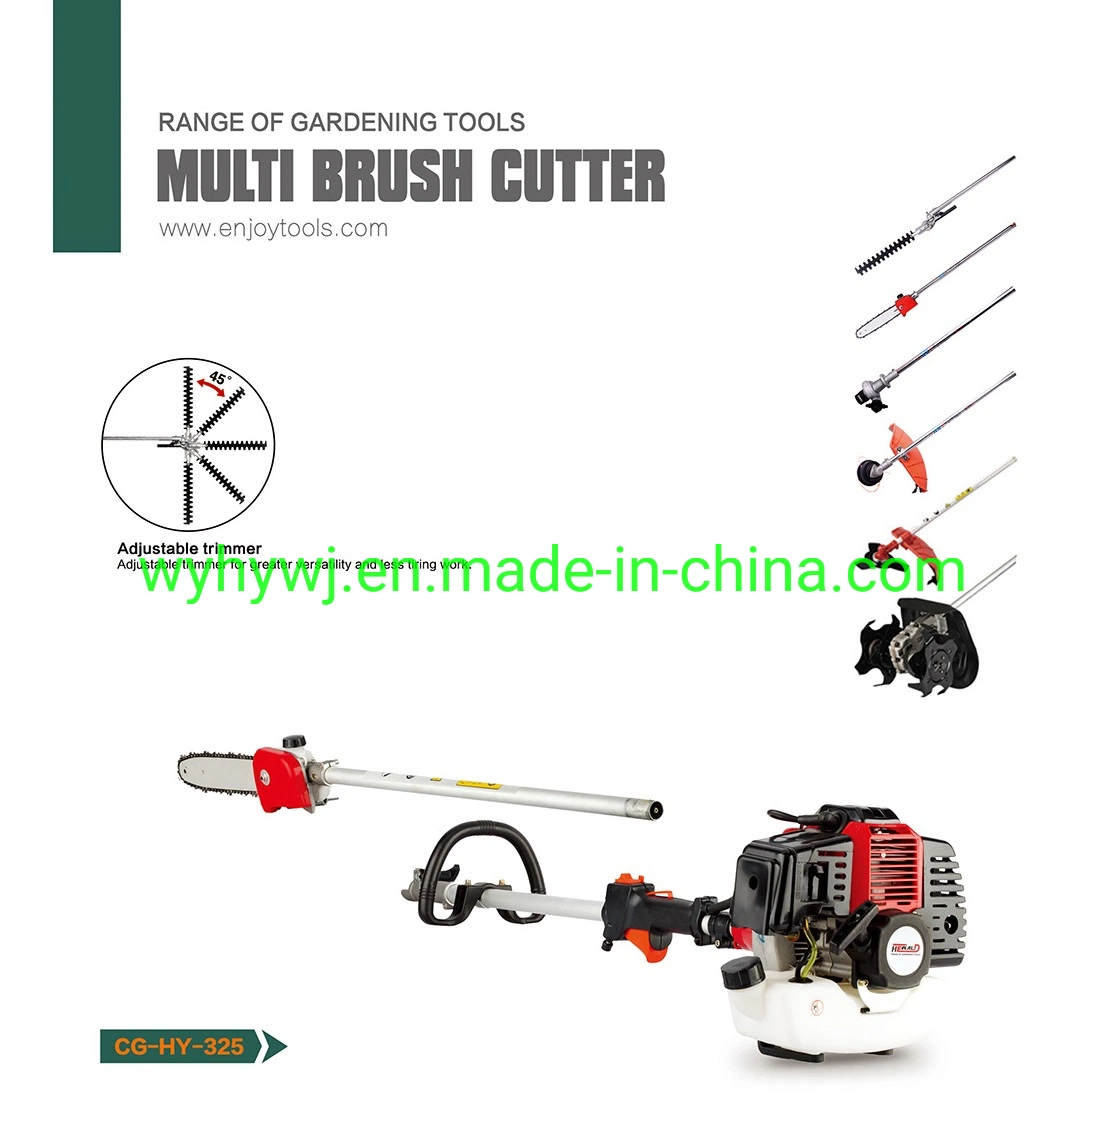 Professional 2 Stroke Good Quality 4 in 1 Multifunction Gasoline Brush Cutter Hy-325 Cut The Grass Easily Garden Tool